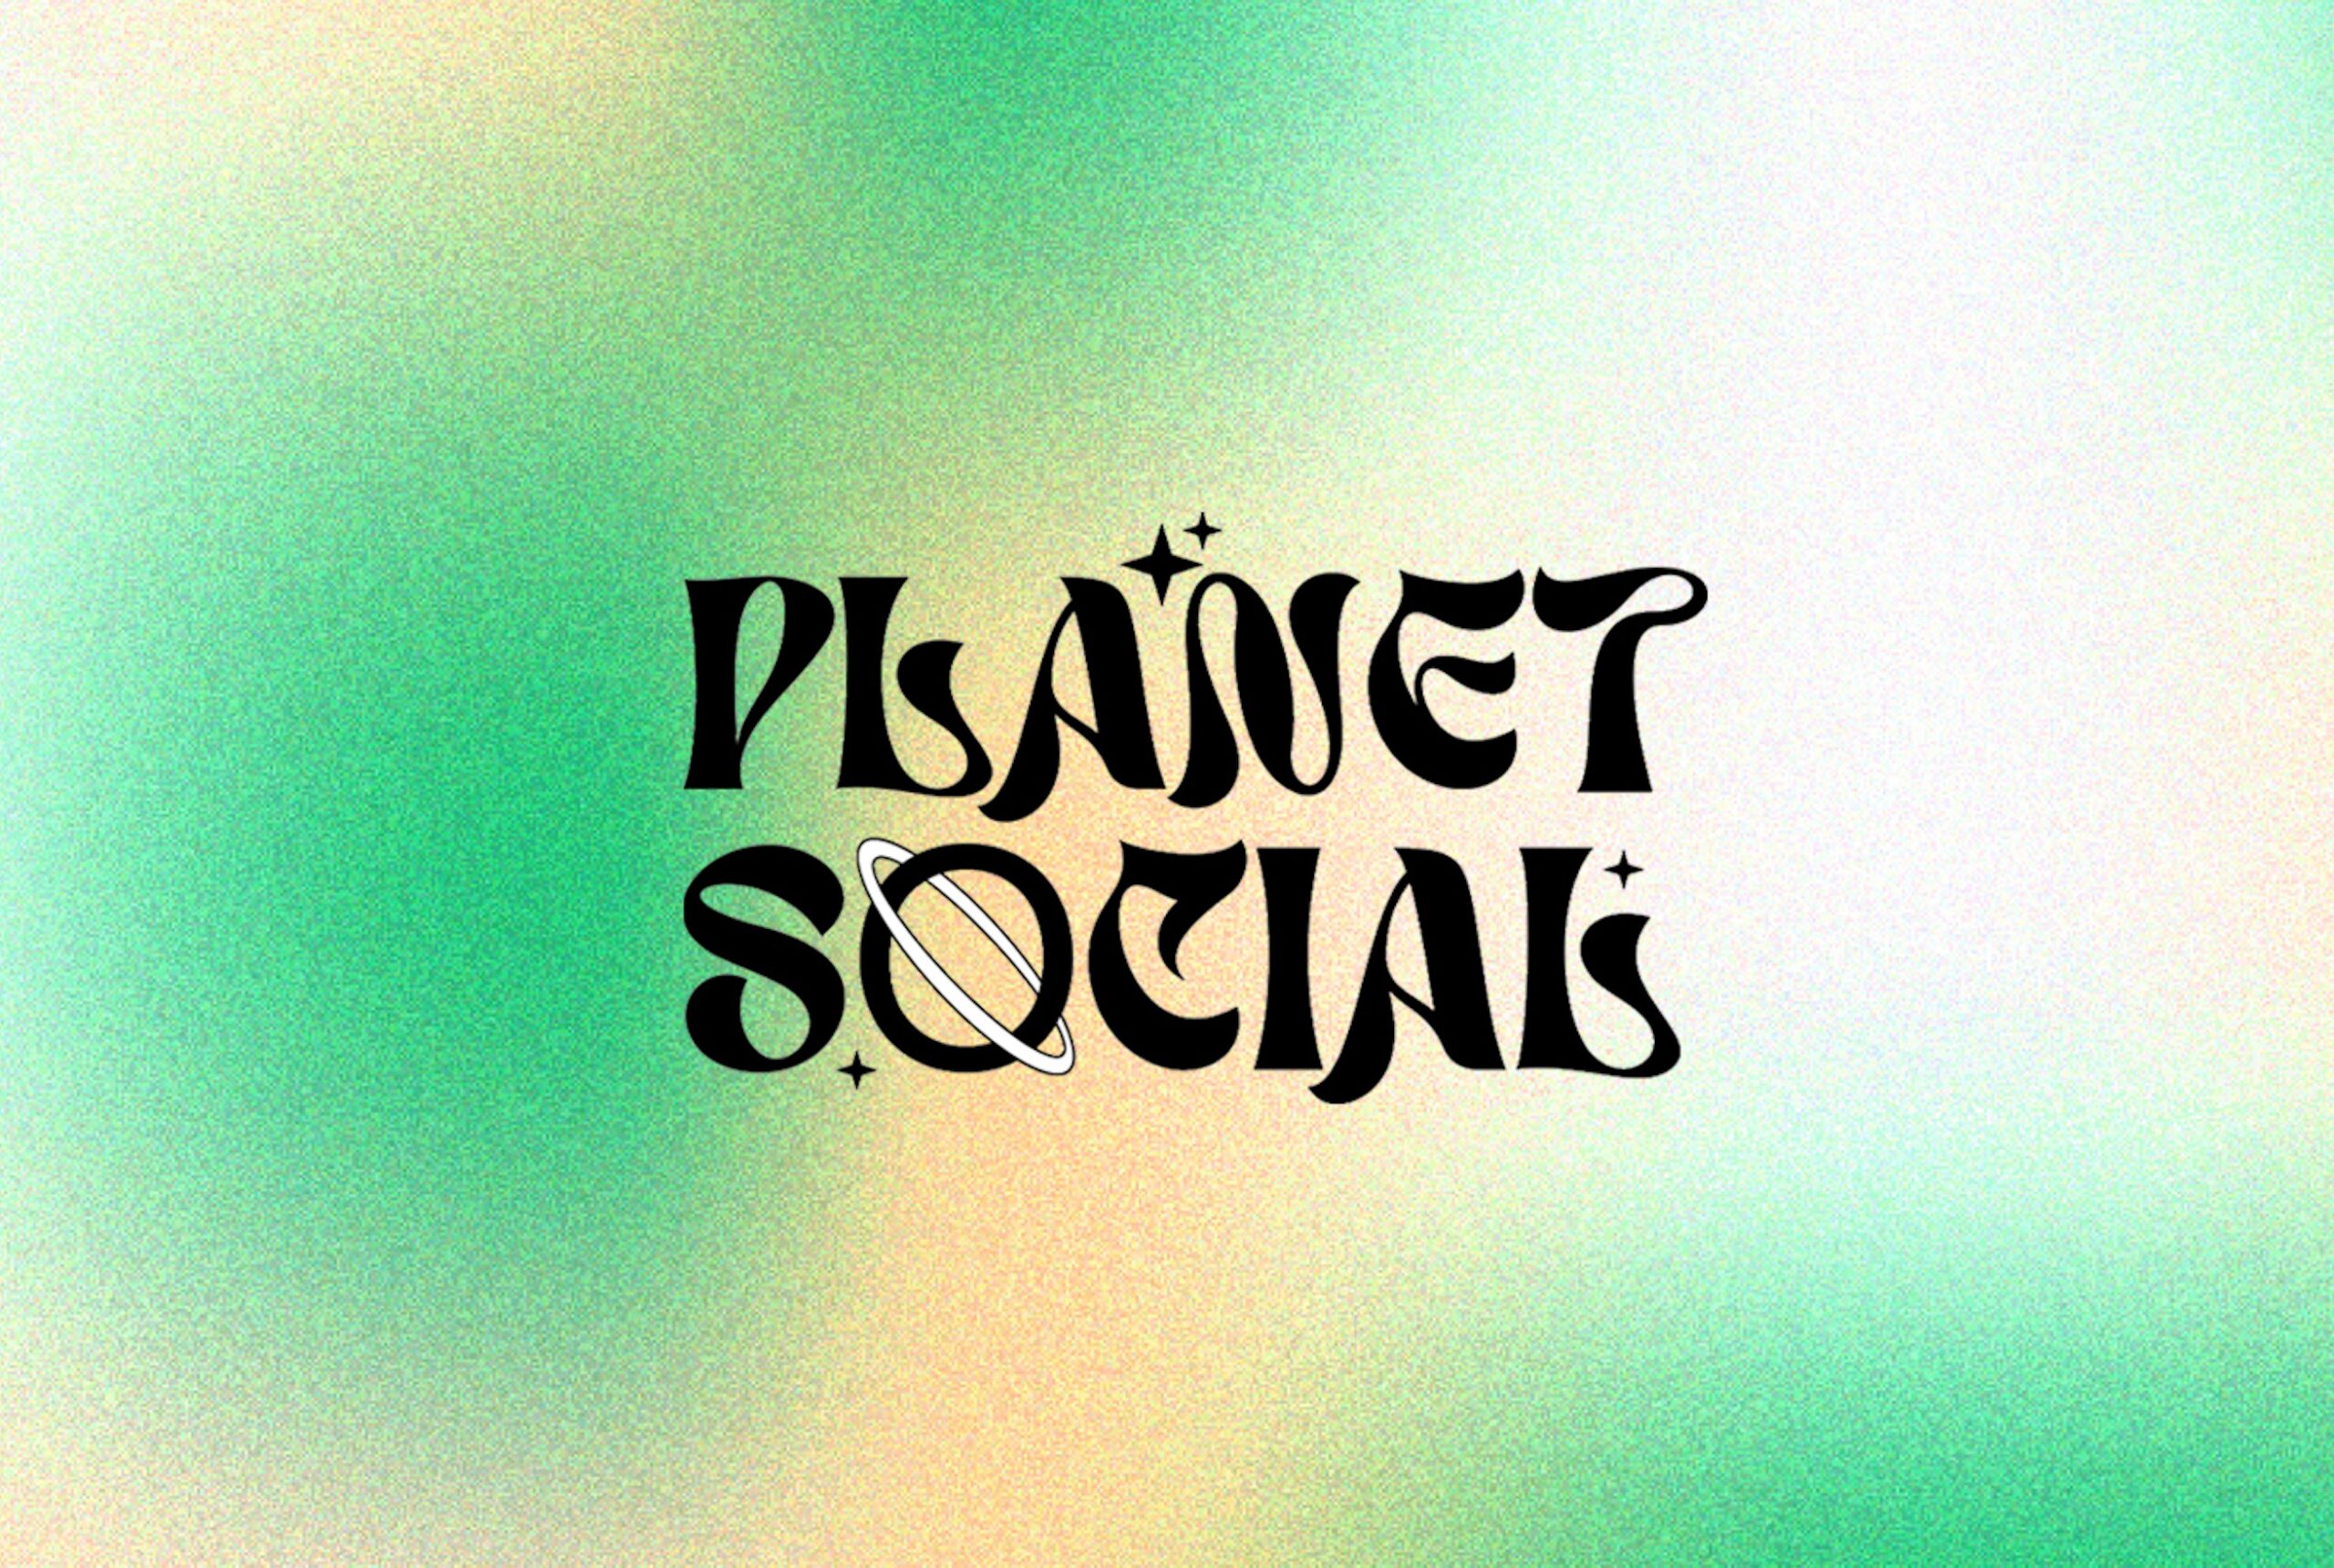 a green and yellow background with the words planet social.